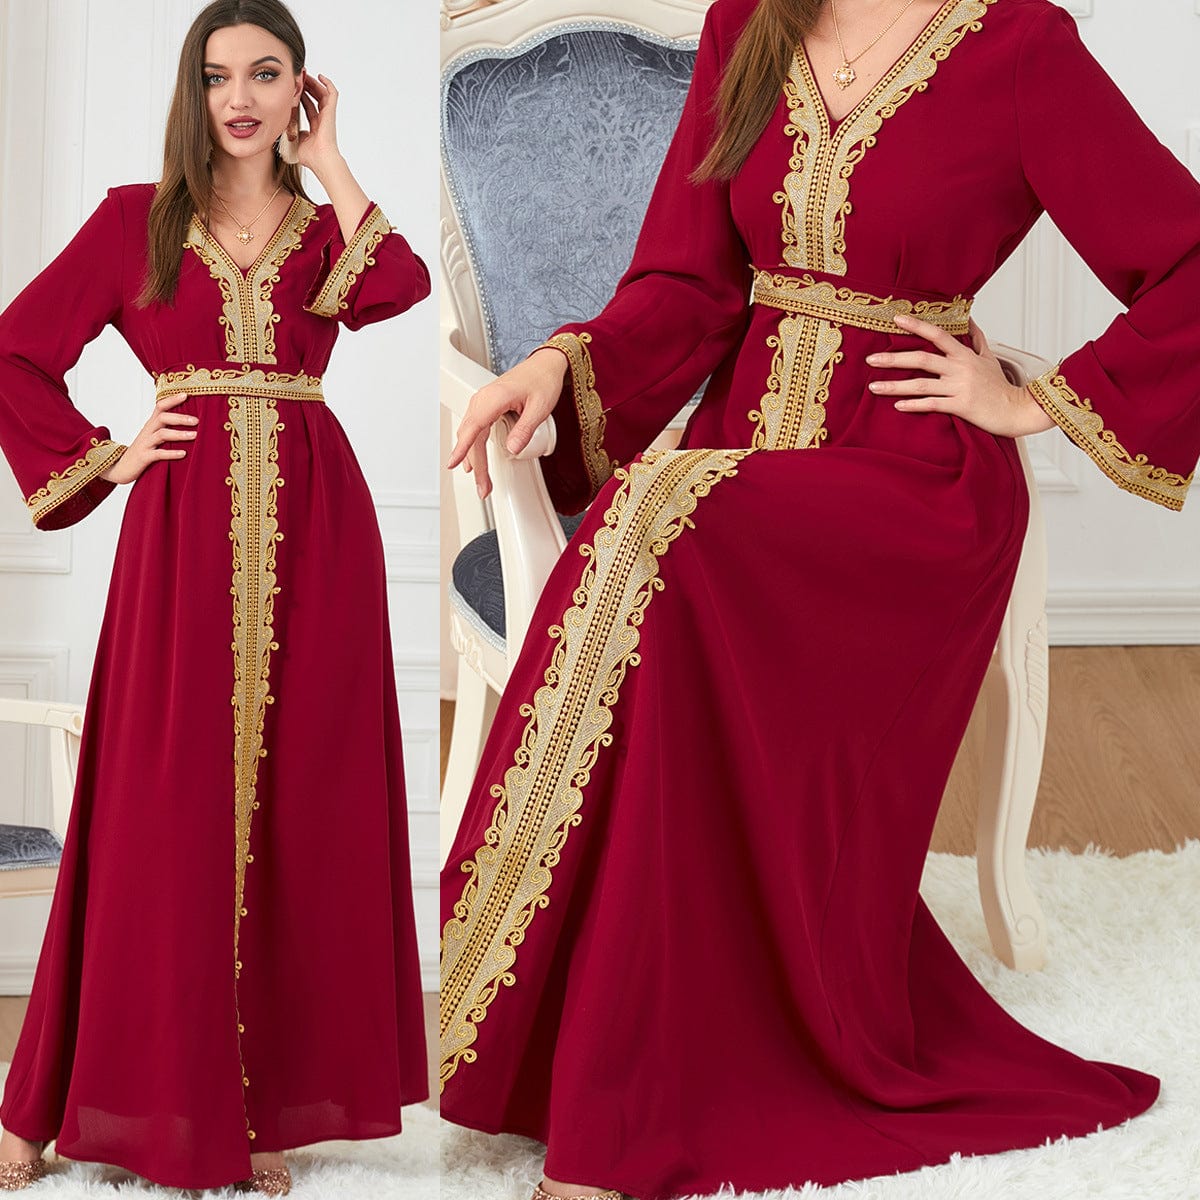 double view of a woman wearing red solid color embroidery long-sleeved dress